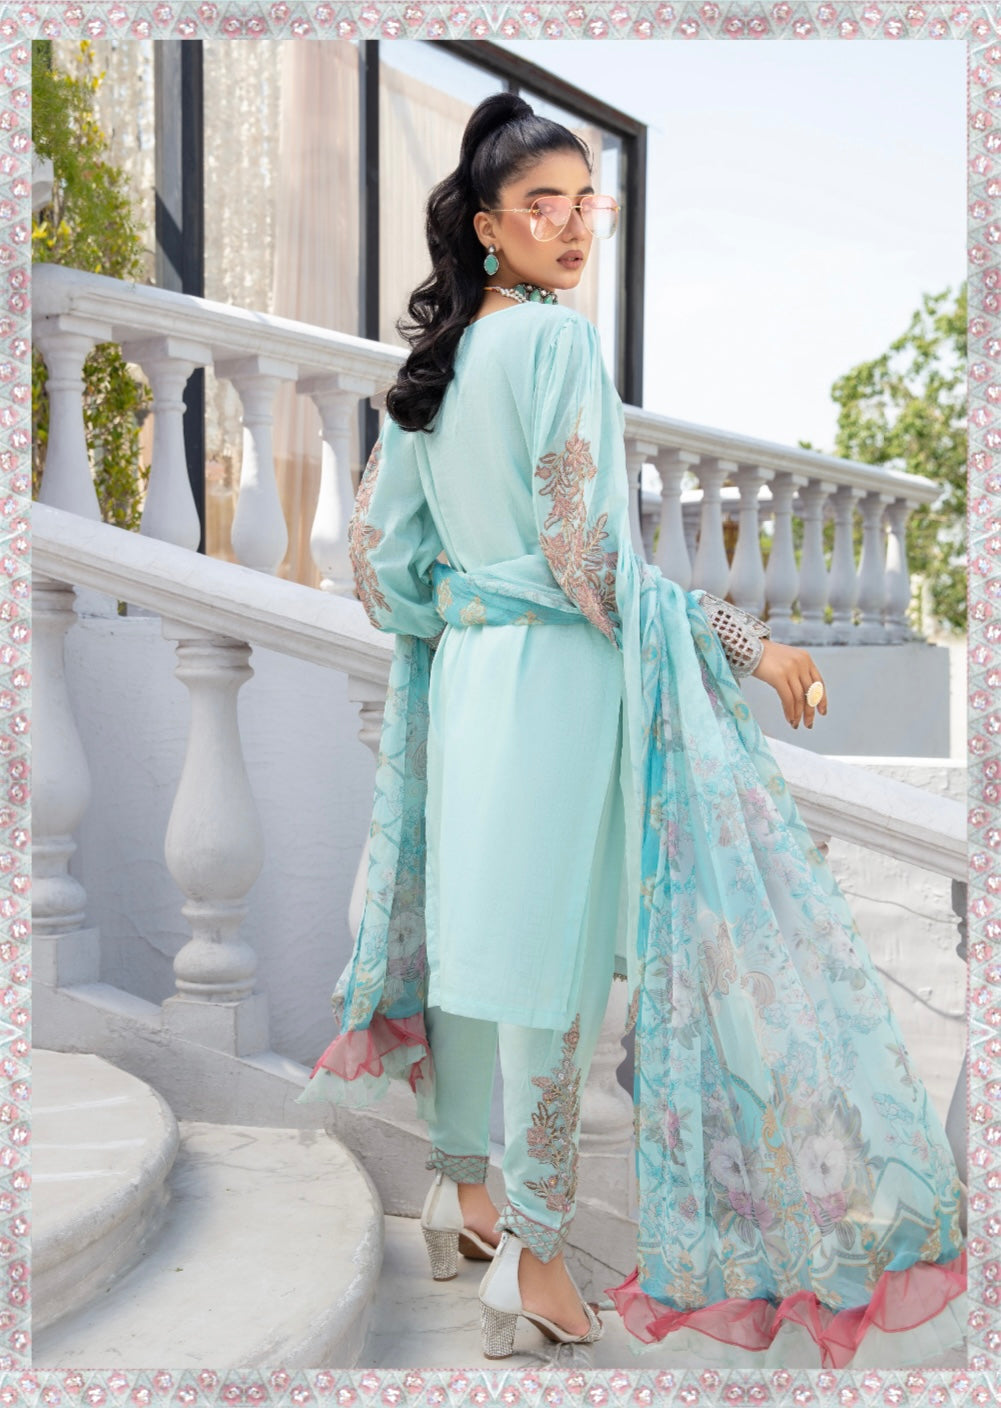 SIMRANS Ivana beaded embroidered lawn suit in ICE BLUE Mother Daughter/kids